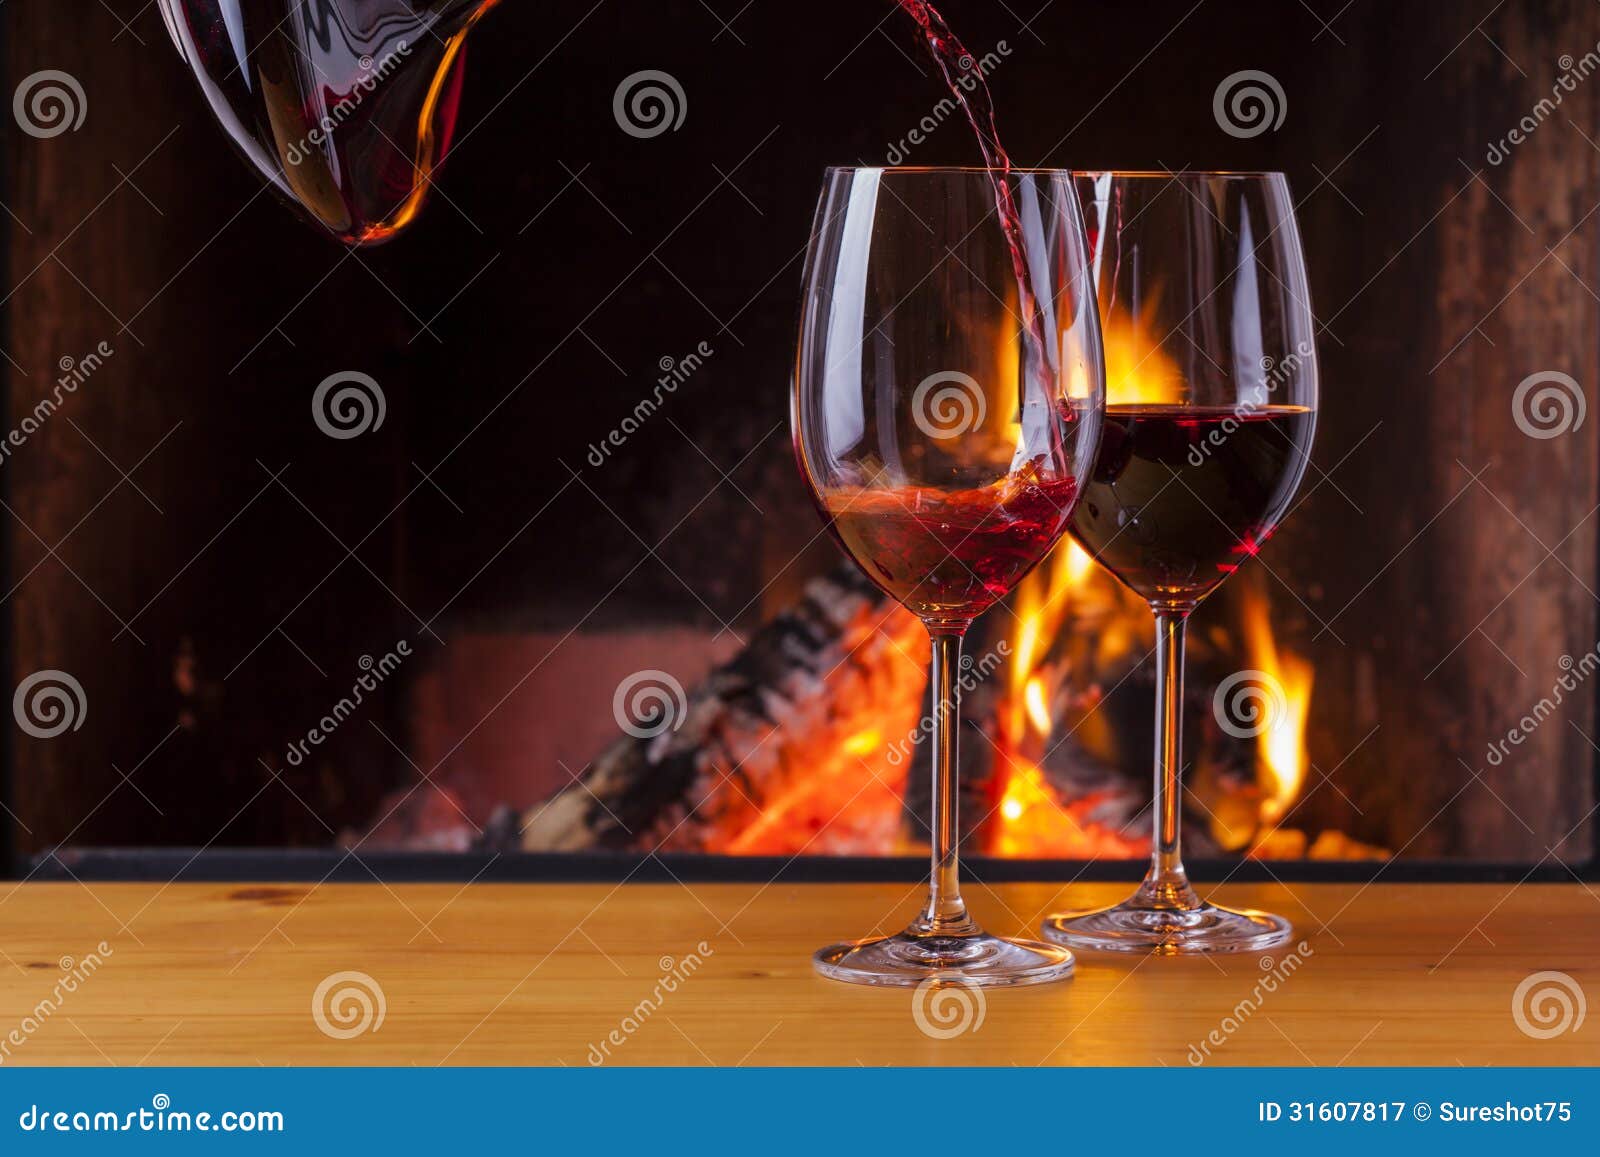 Pouring Red Wine At Cozy Fireplace Stock Image - Image of decanter, fireplace: 31607817